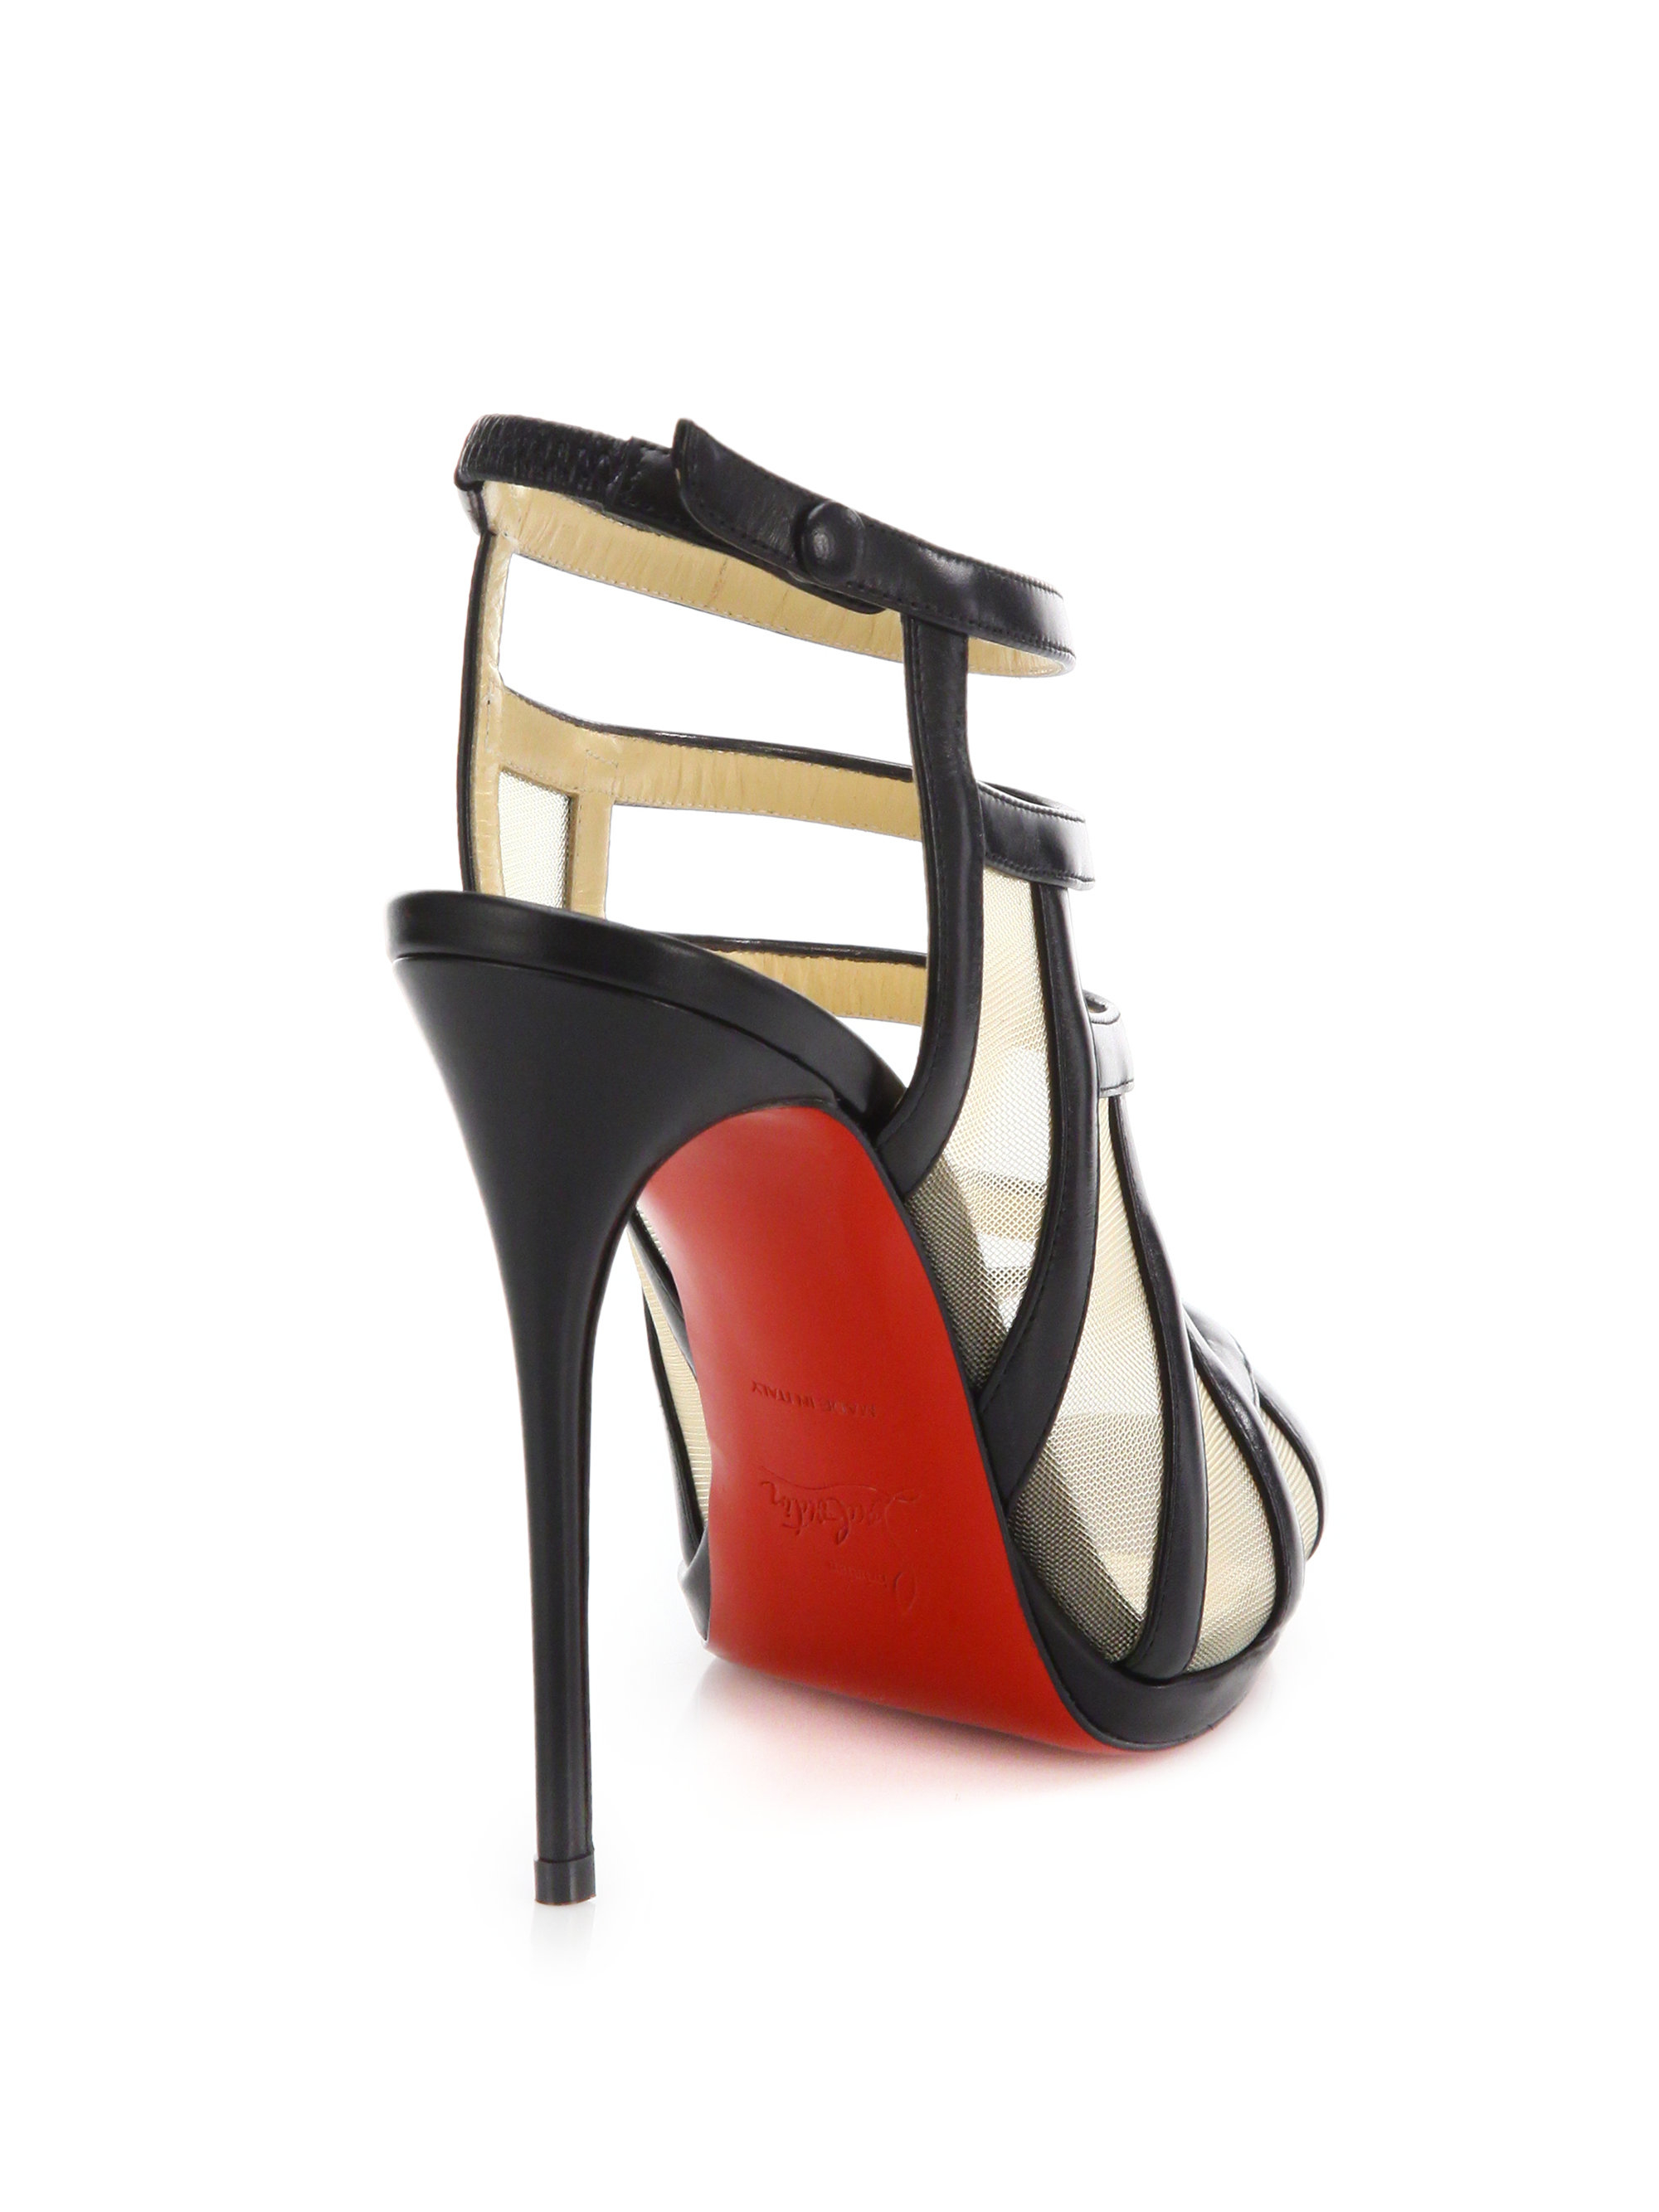 christian louboutin platform cage sandals Black leather stacked ...